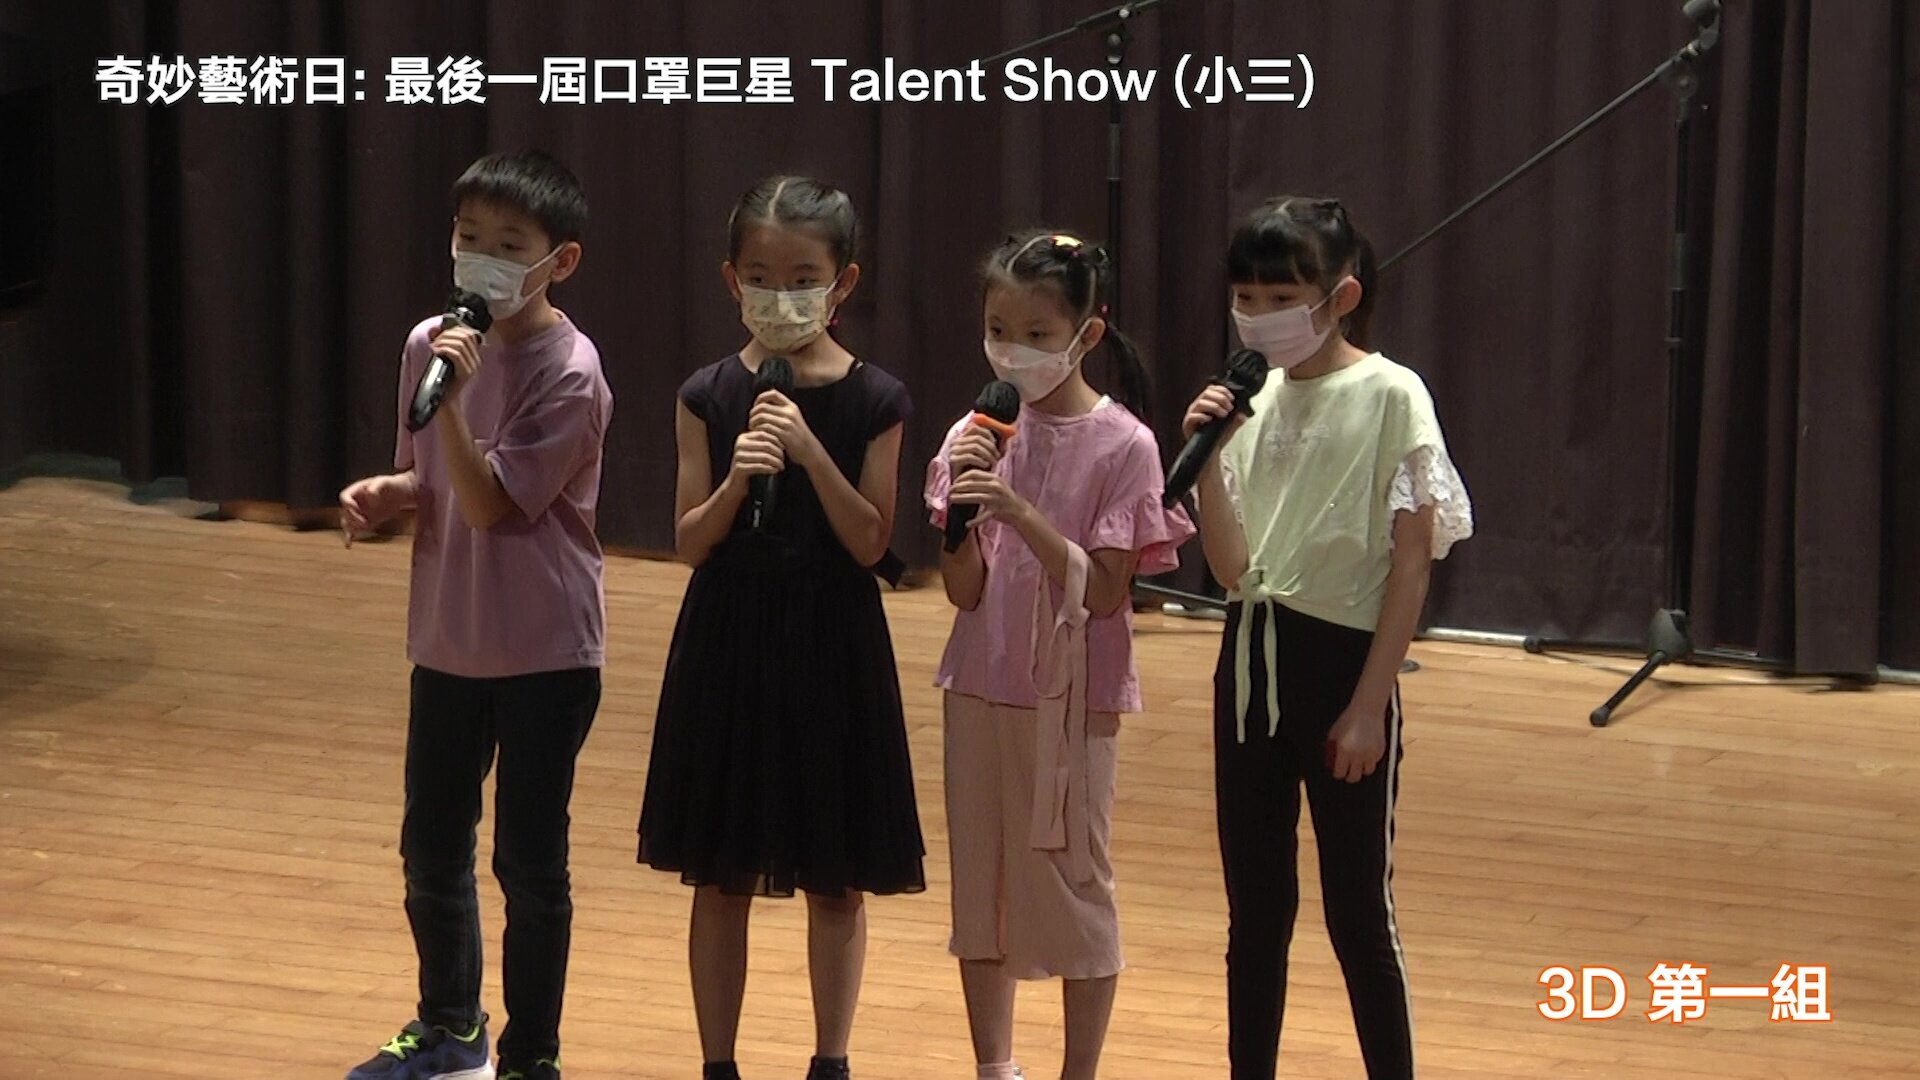 Awesome Arts Day: Talent Show (P3)